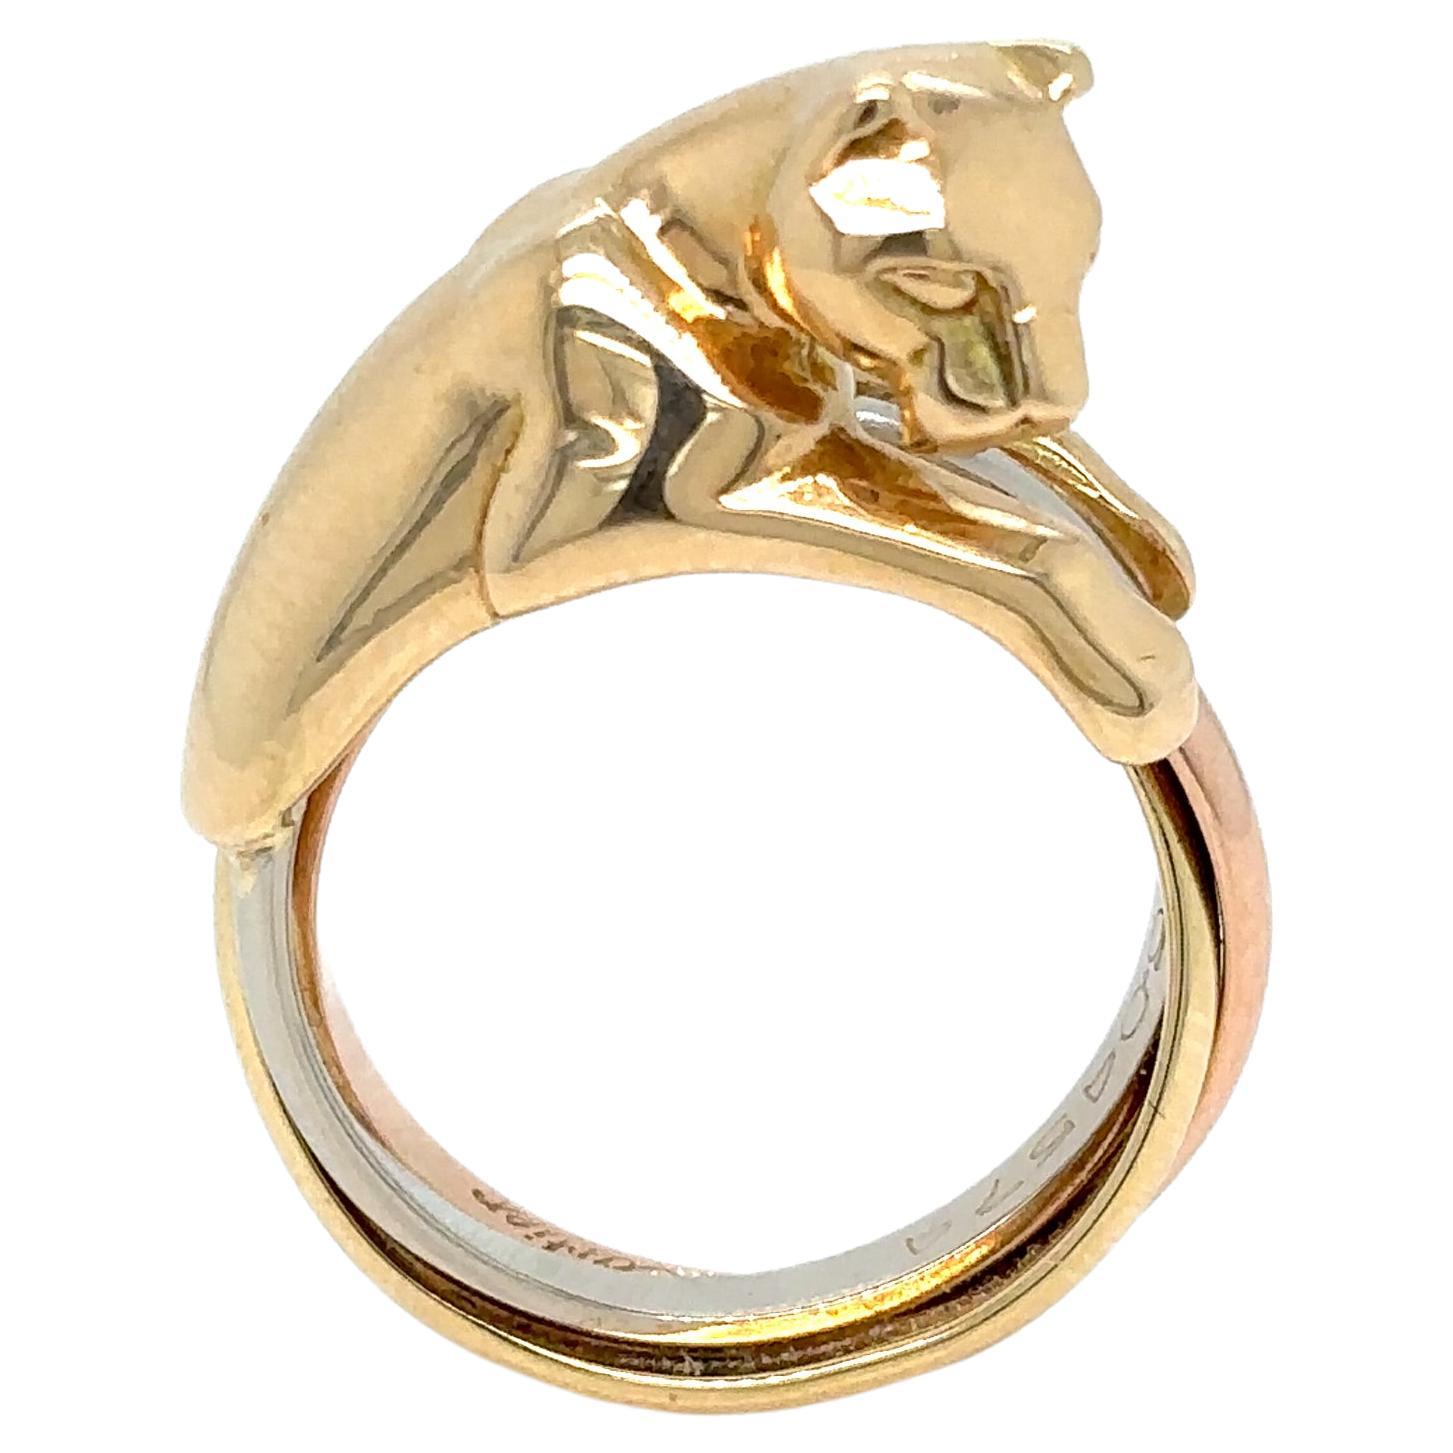 Cartier Panthère Gold Trinity Band Ring im Angebot